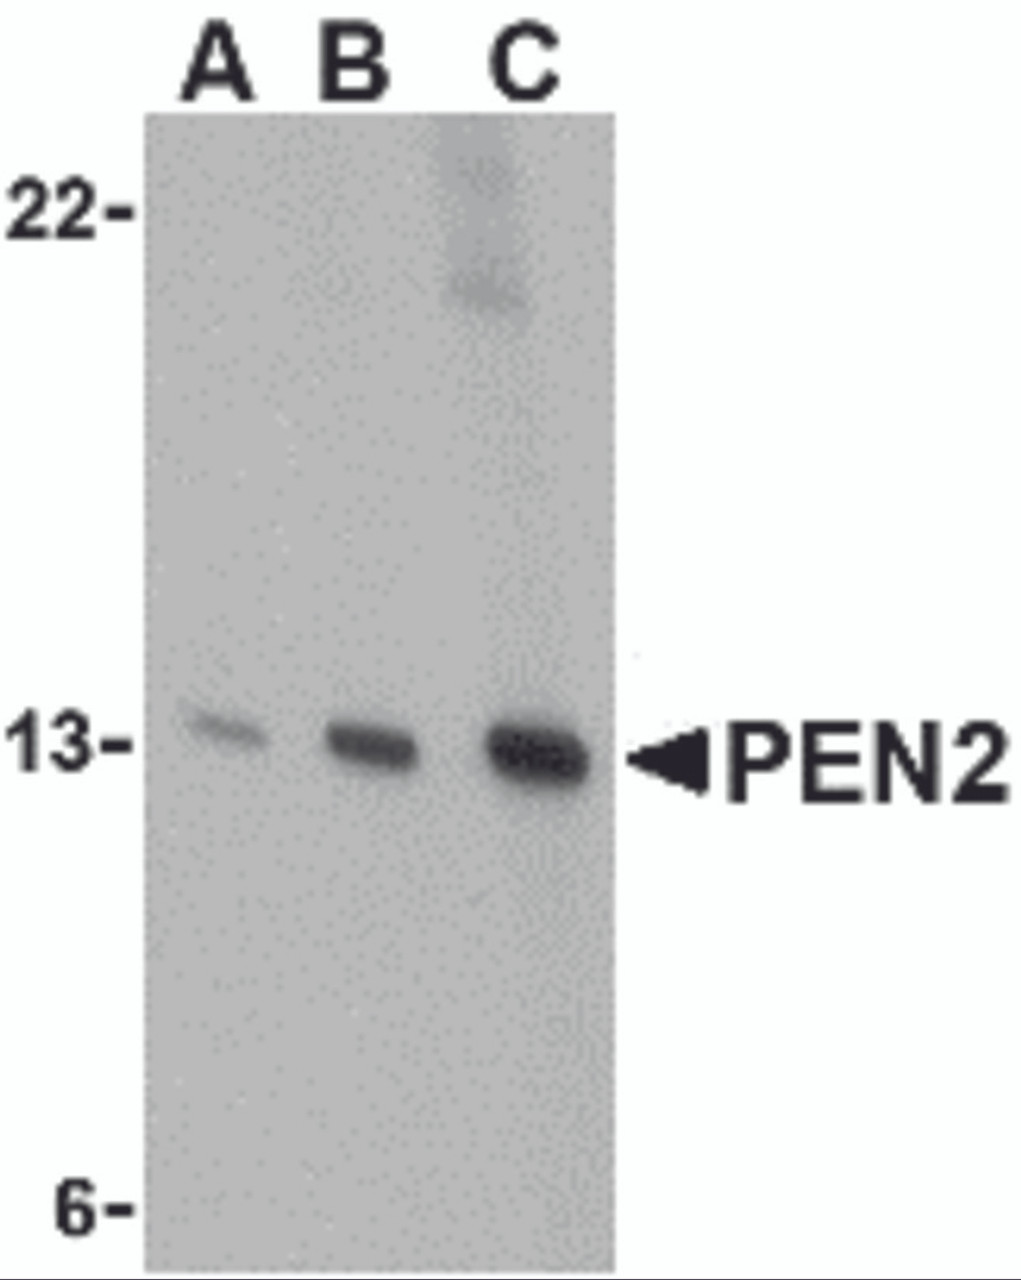 Western blot analysis of PEN2 in K562 cell lysate with PEN2 antibody at (A) 0.5, (B) 1, and (C) 2 &#956;g/mL.